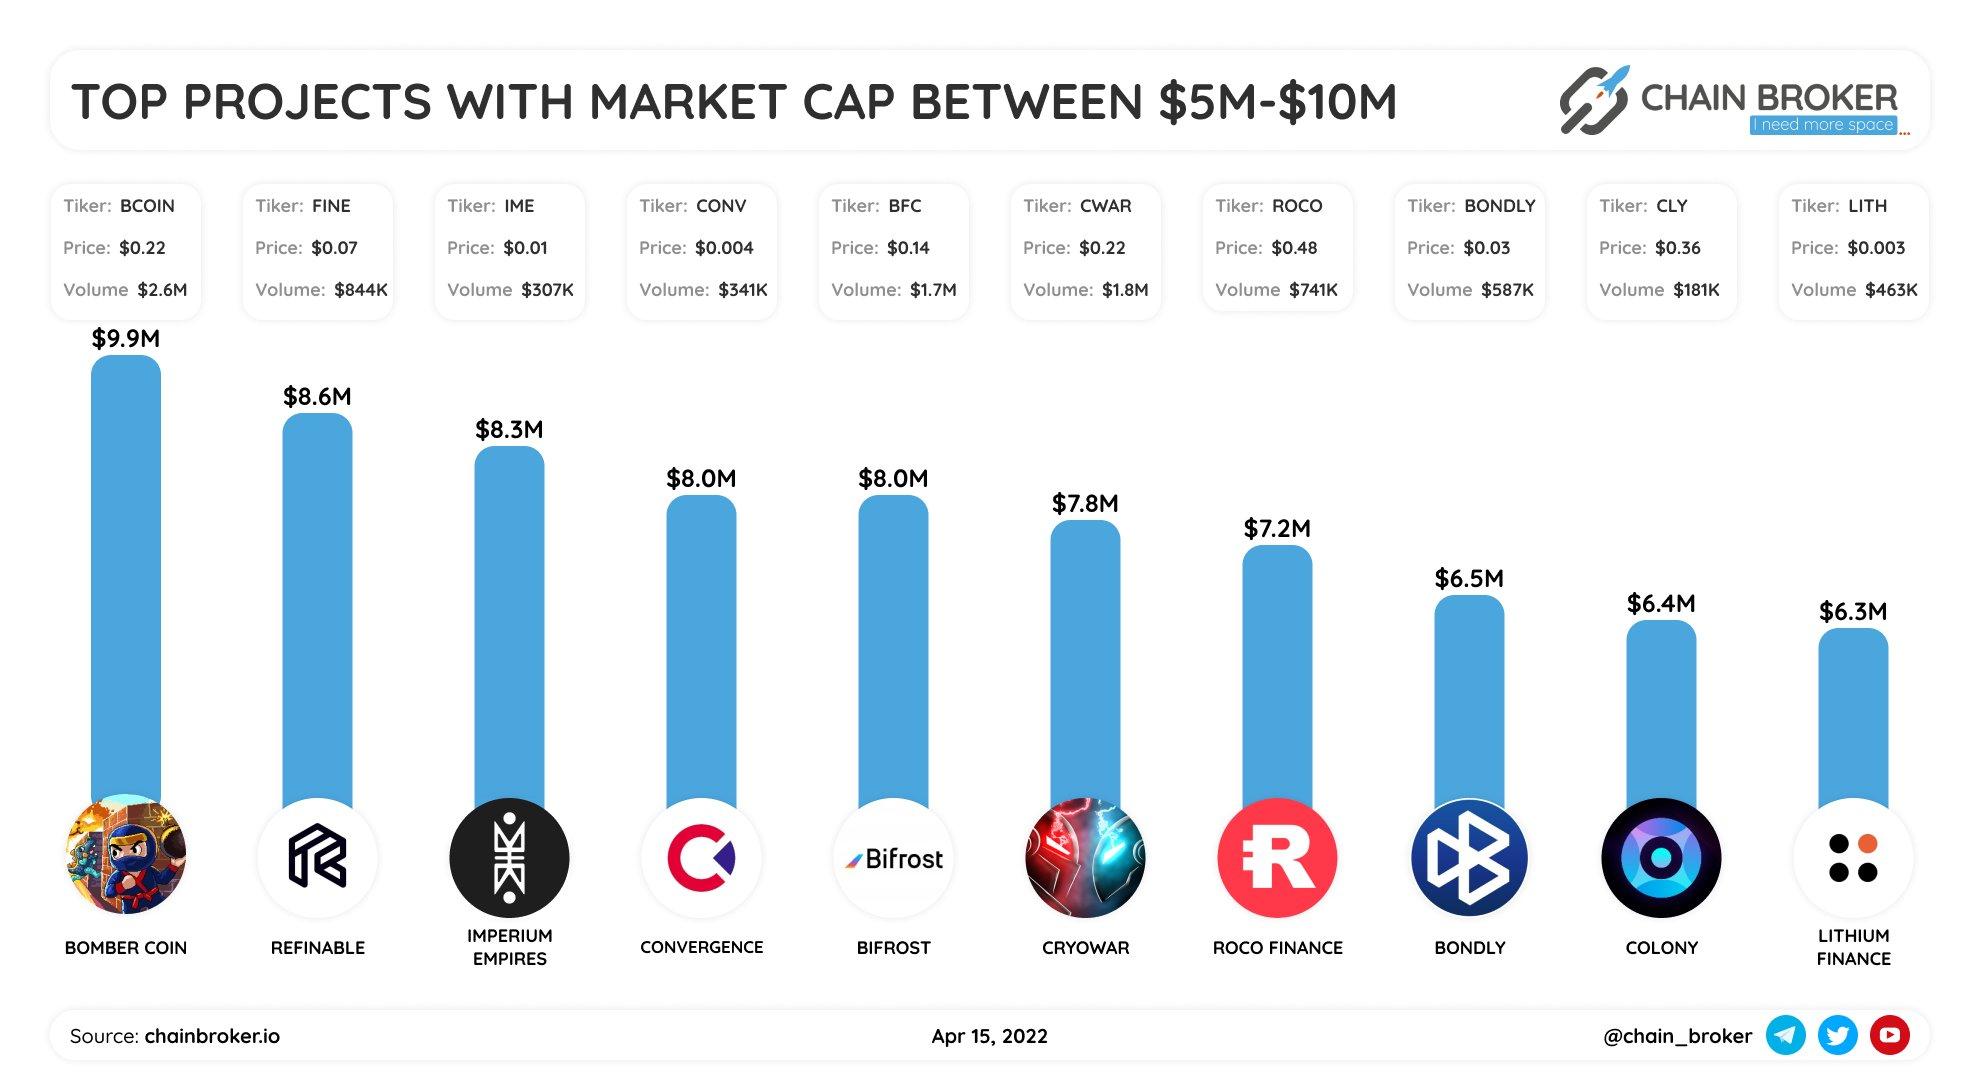 Top projects with market cap between $5M-$10M